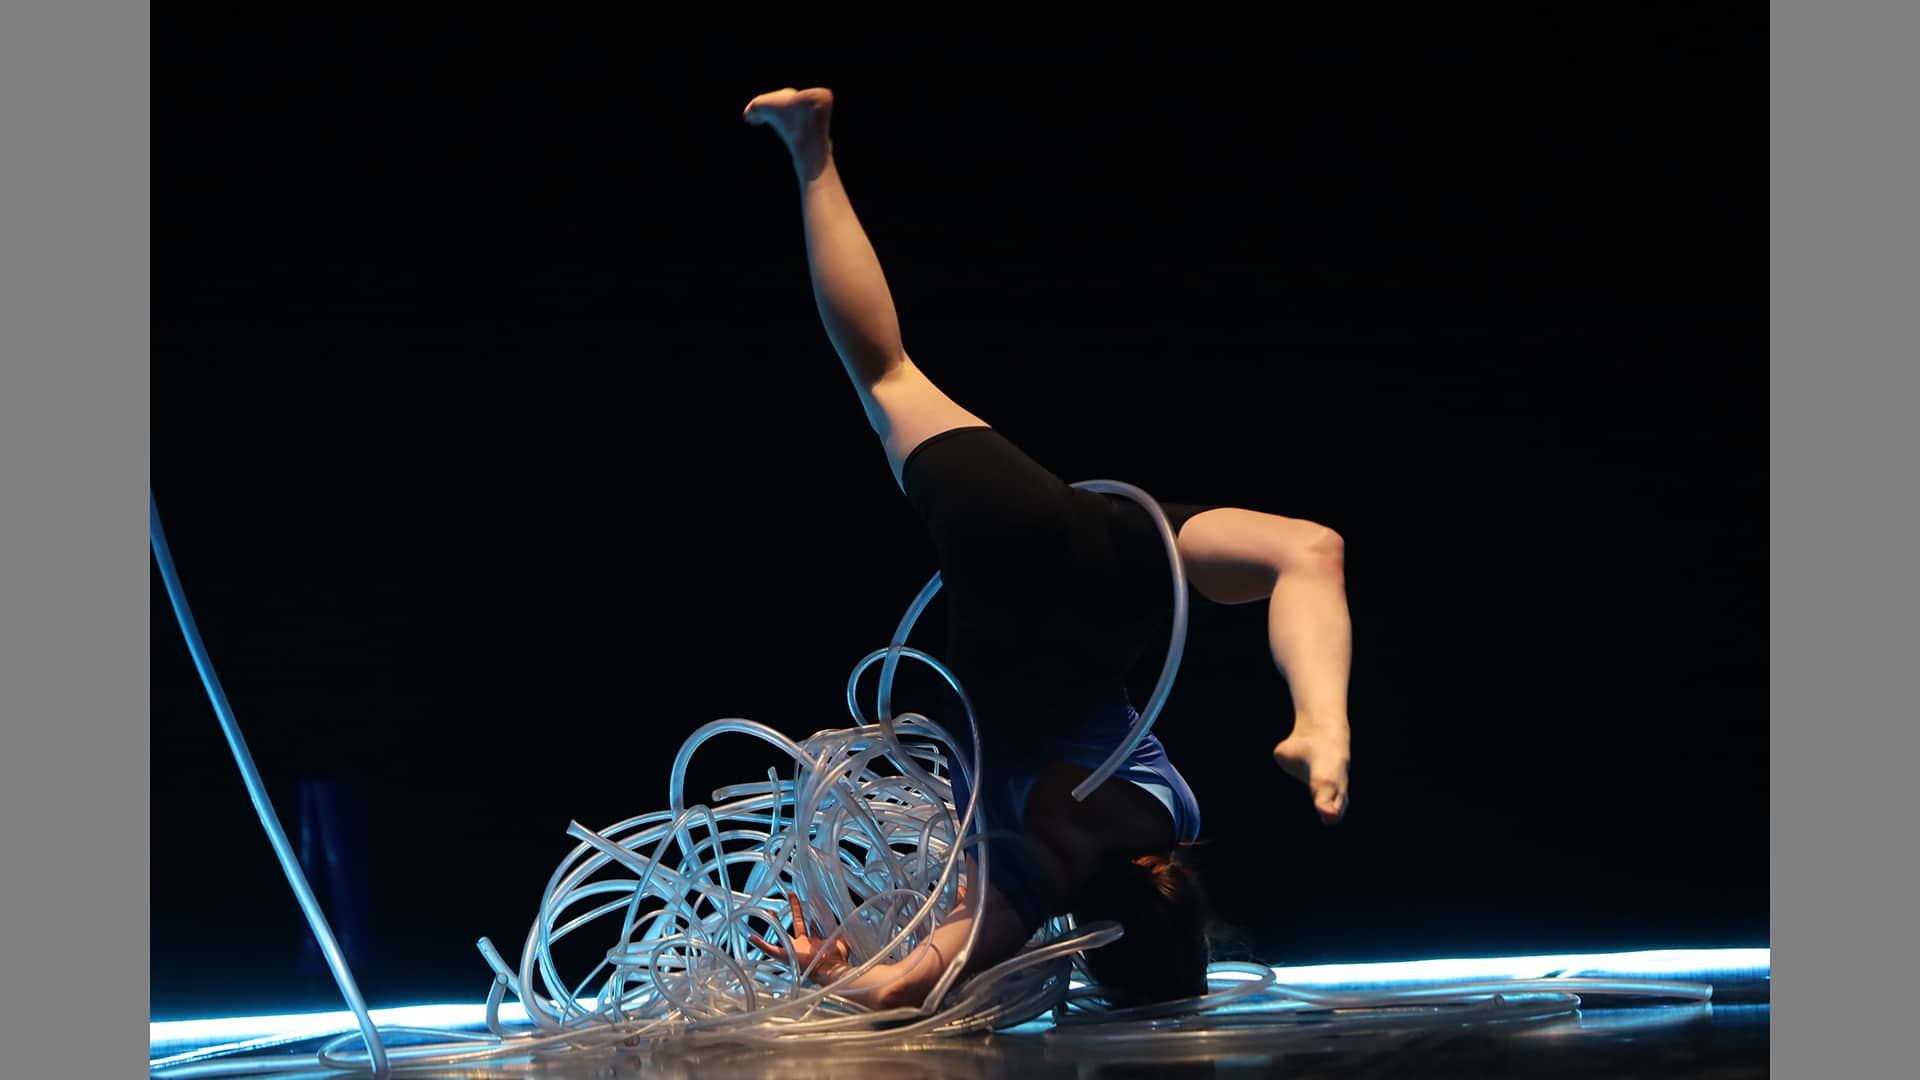 Performer is upside down, her legs in the air, bent. Her face is hidden behind a mound of plastic tubing